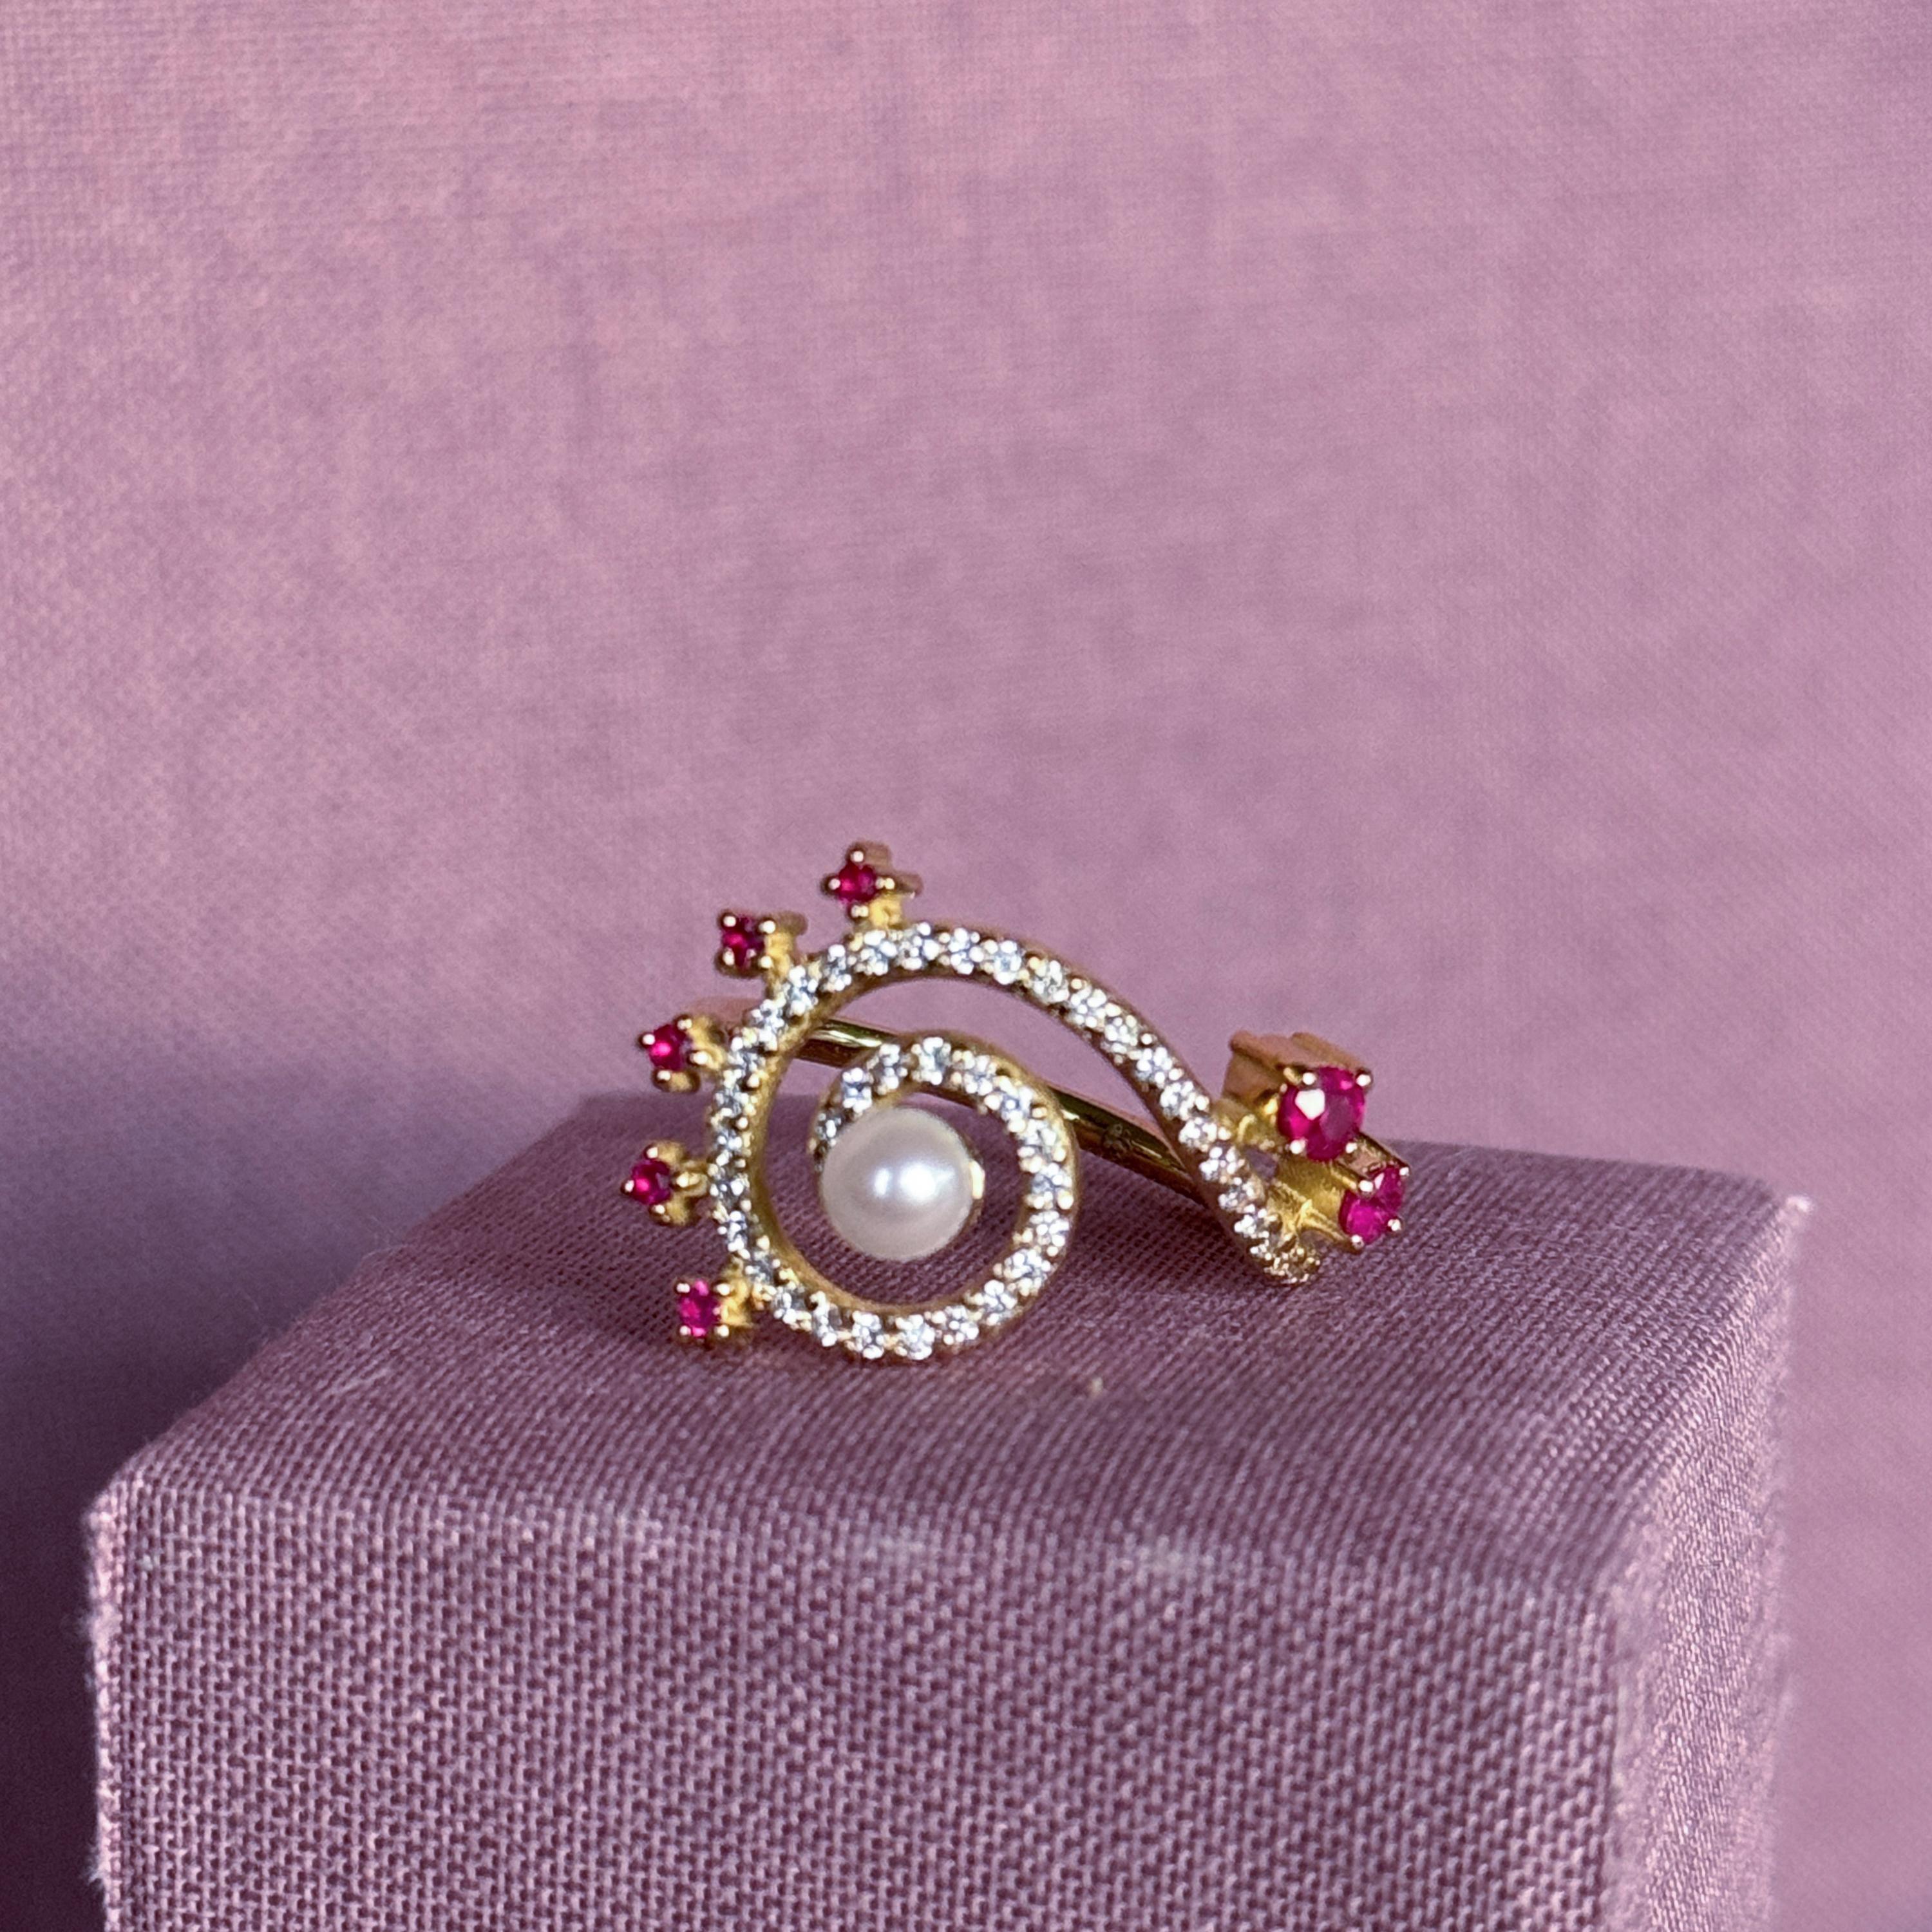 Contemporary Serenity Index Finger Ring in 18 Karat Gold with Diamonds, Rubies And A Pearl